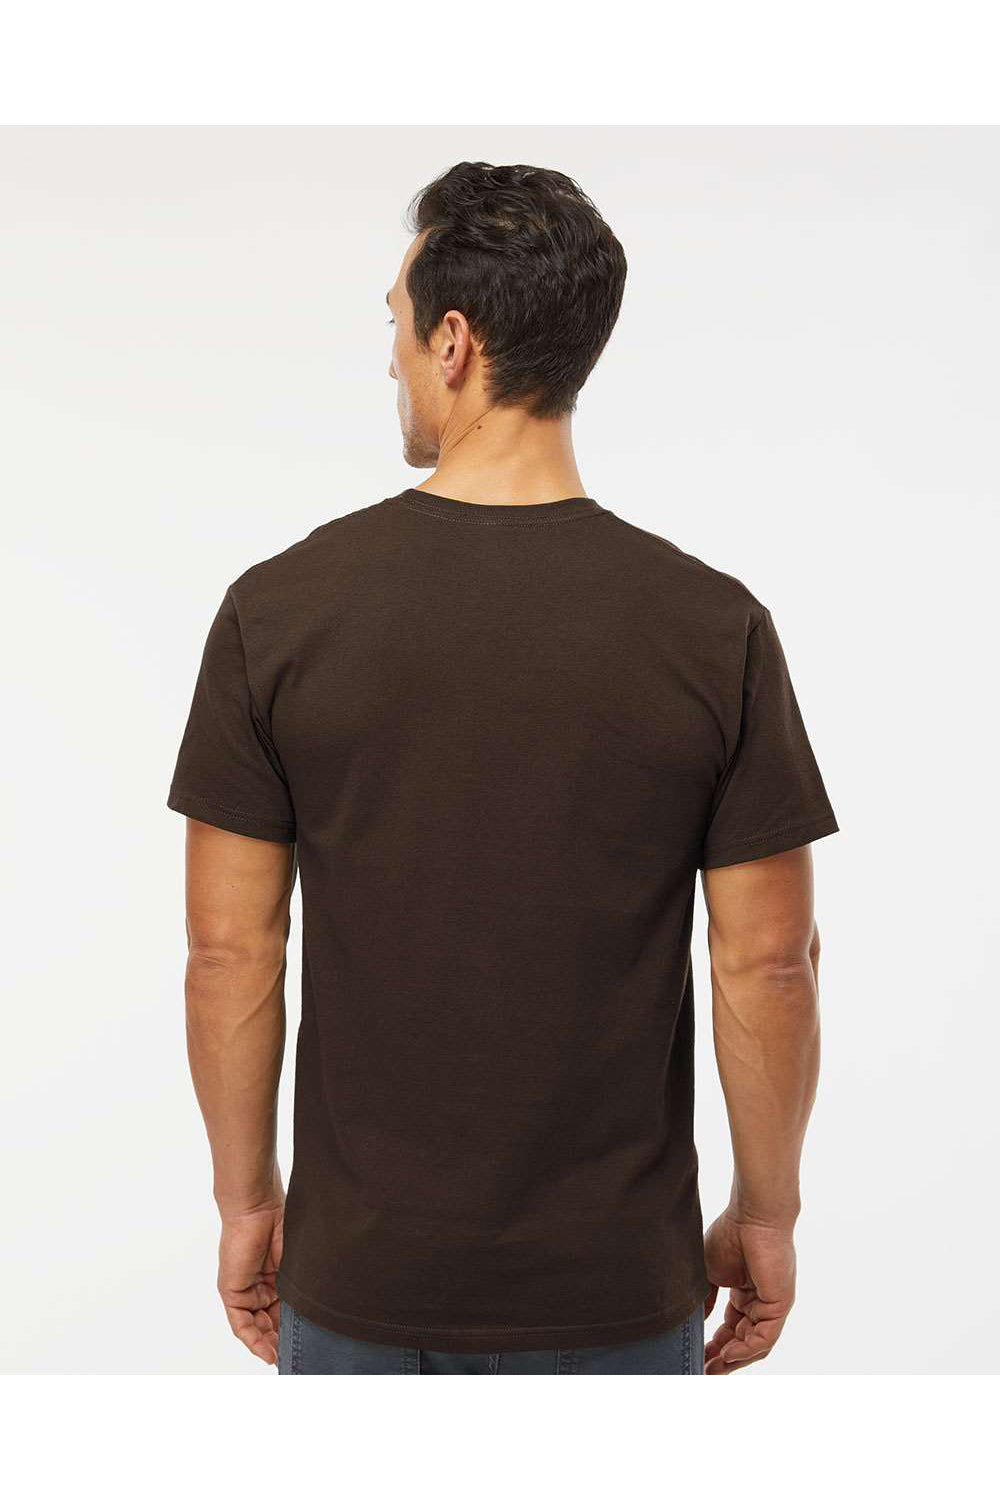 M&O 4800 Mens Gold Soft Touch Short Sleeve Crewneck T-Shirt Chocolate Brown Model Back